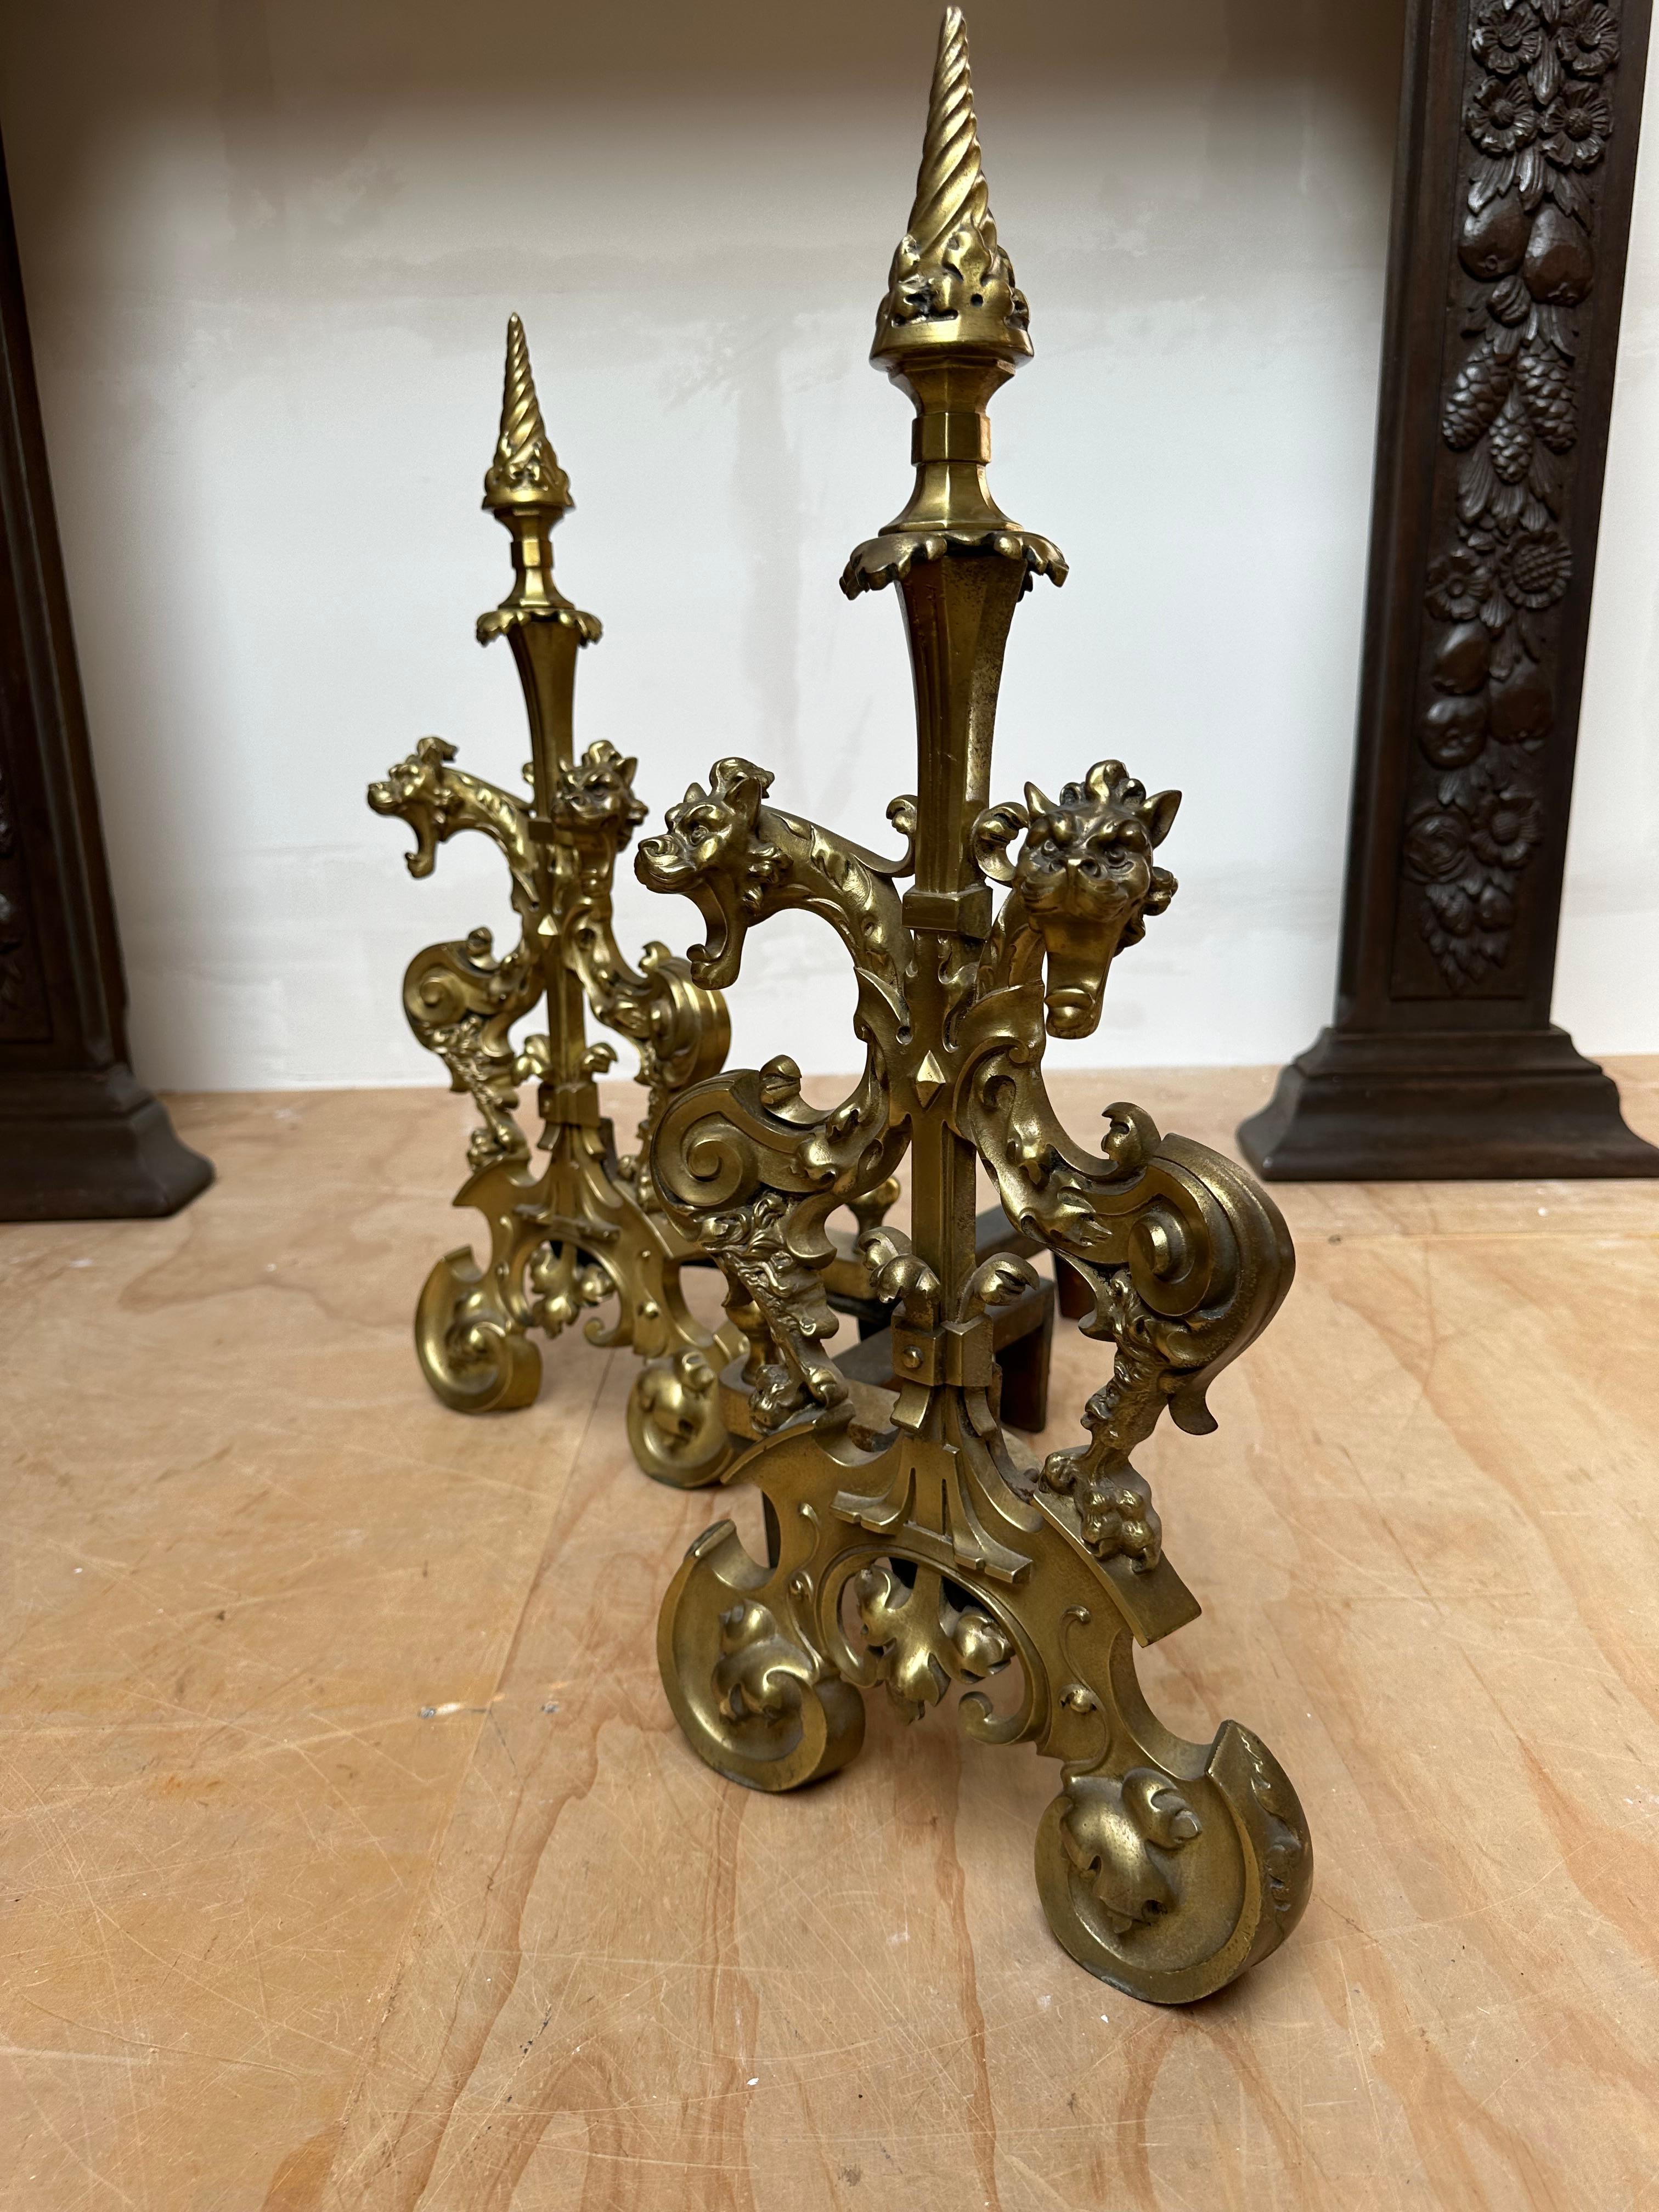 Antique Gothic Revival Gilt Bronze Dragon Andirons or Firedogs / Fireplace Tools In Excellent Condition For Sale In Lisse, NL